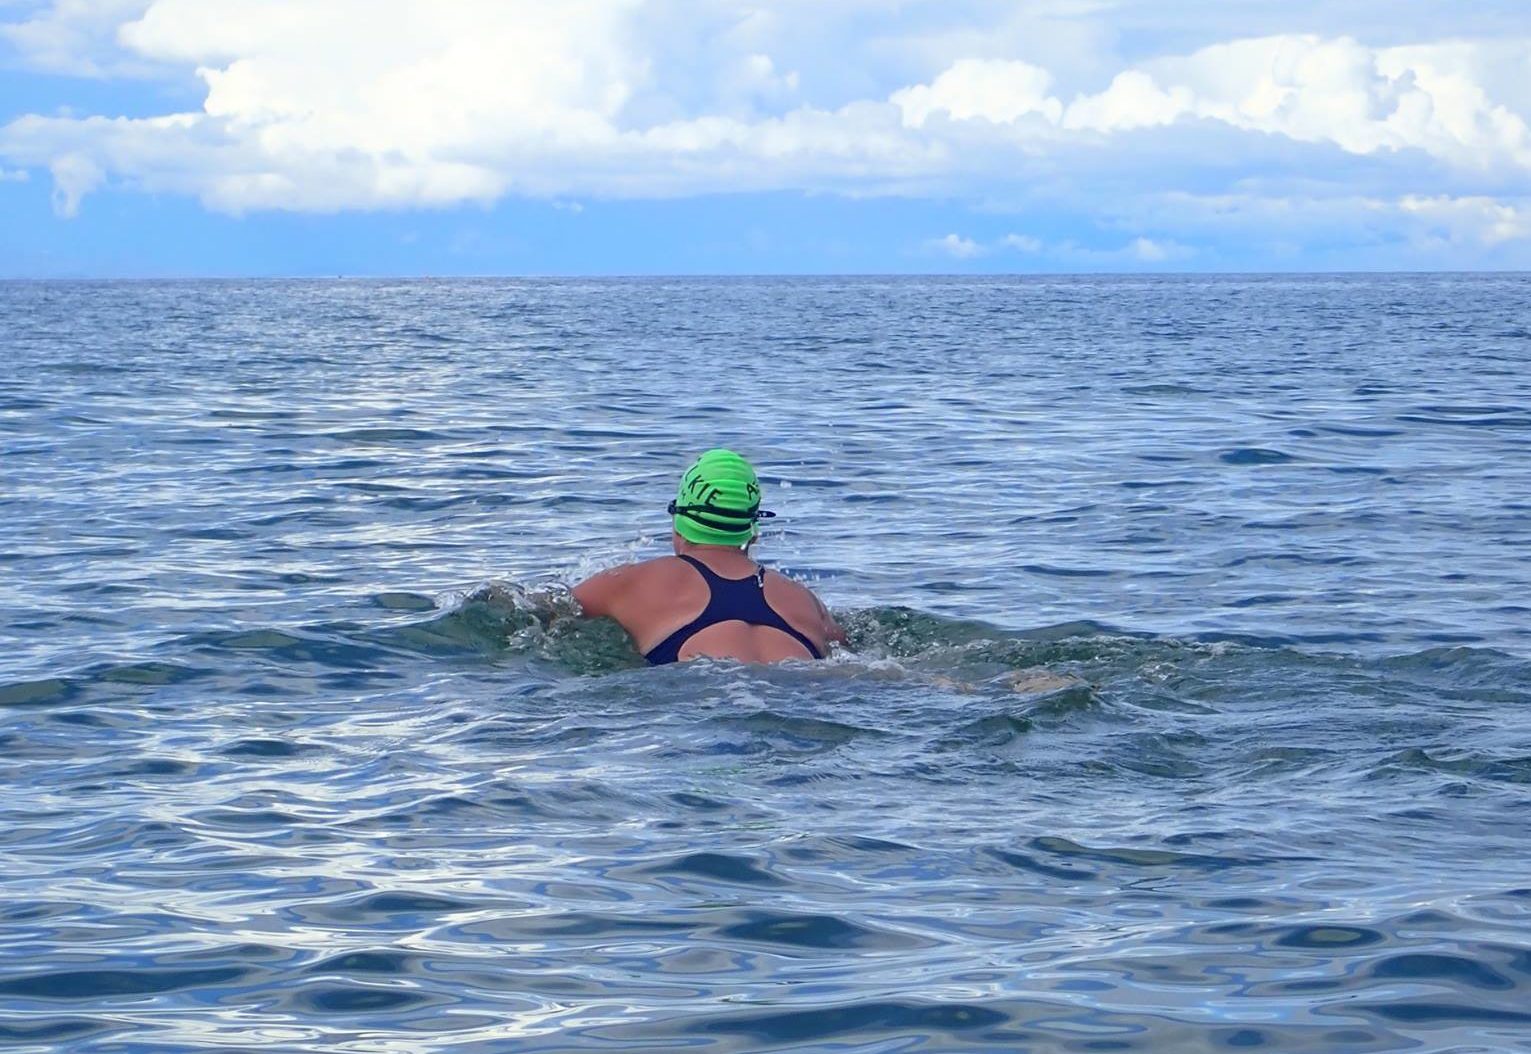 Channel swim in aid of marine charity for north-east woman